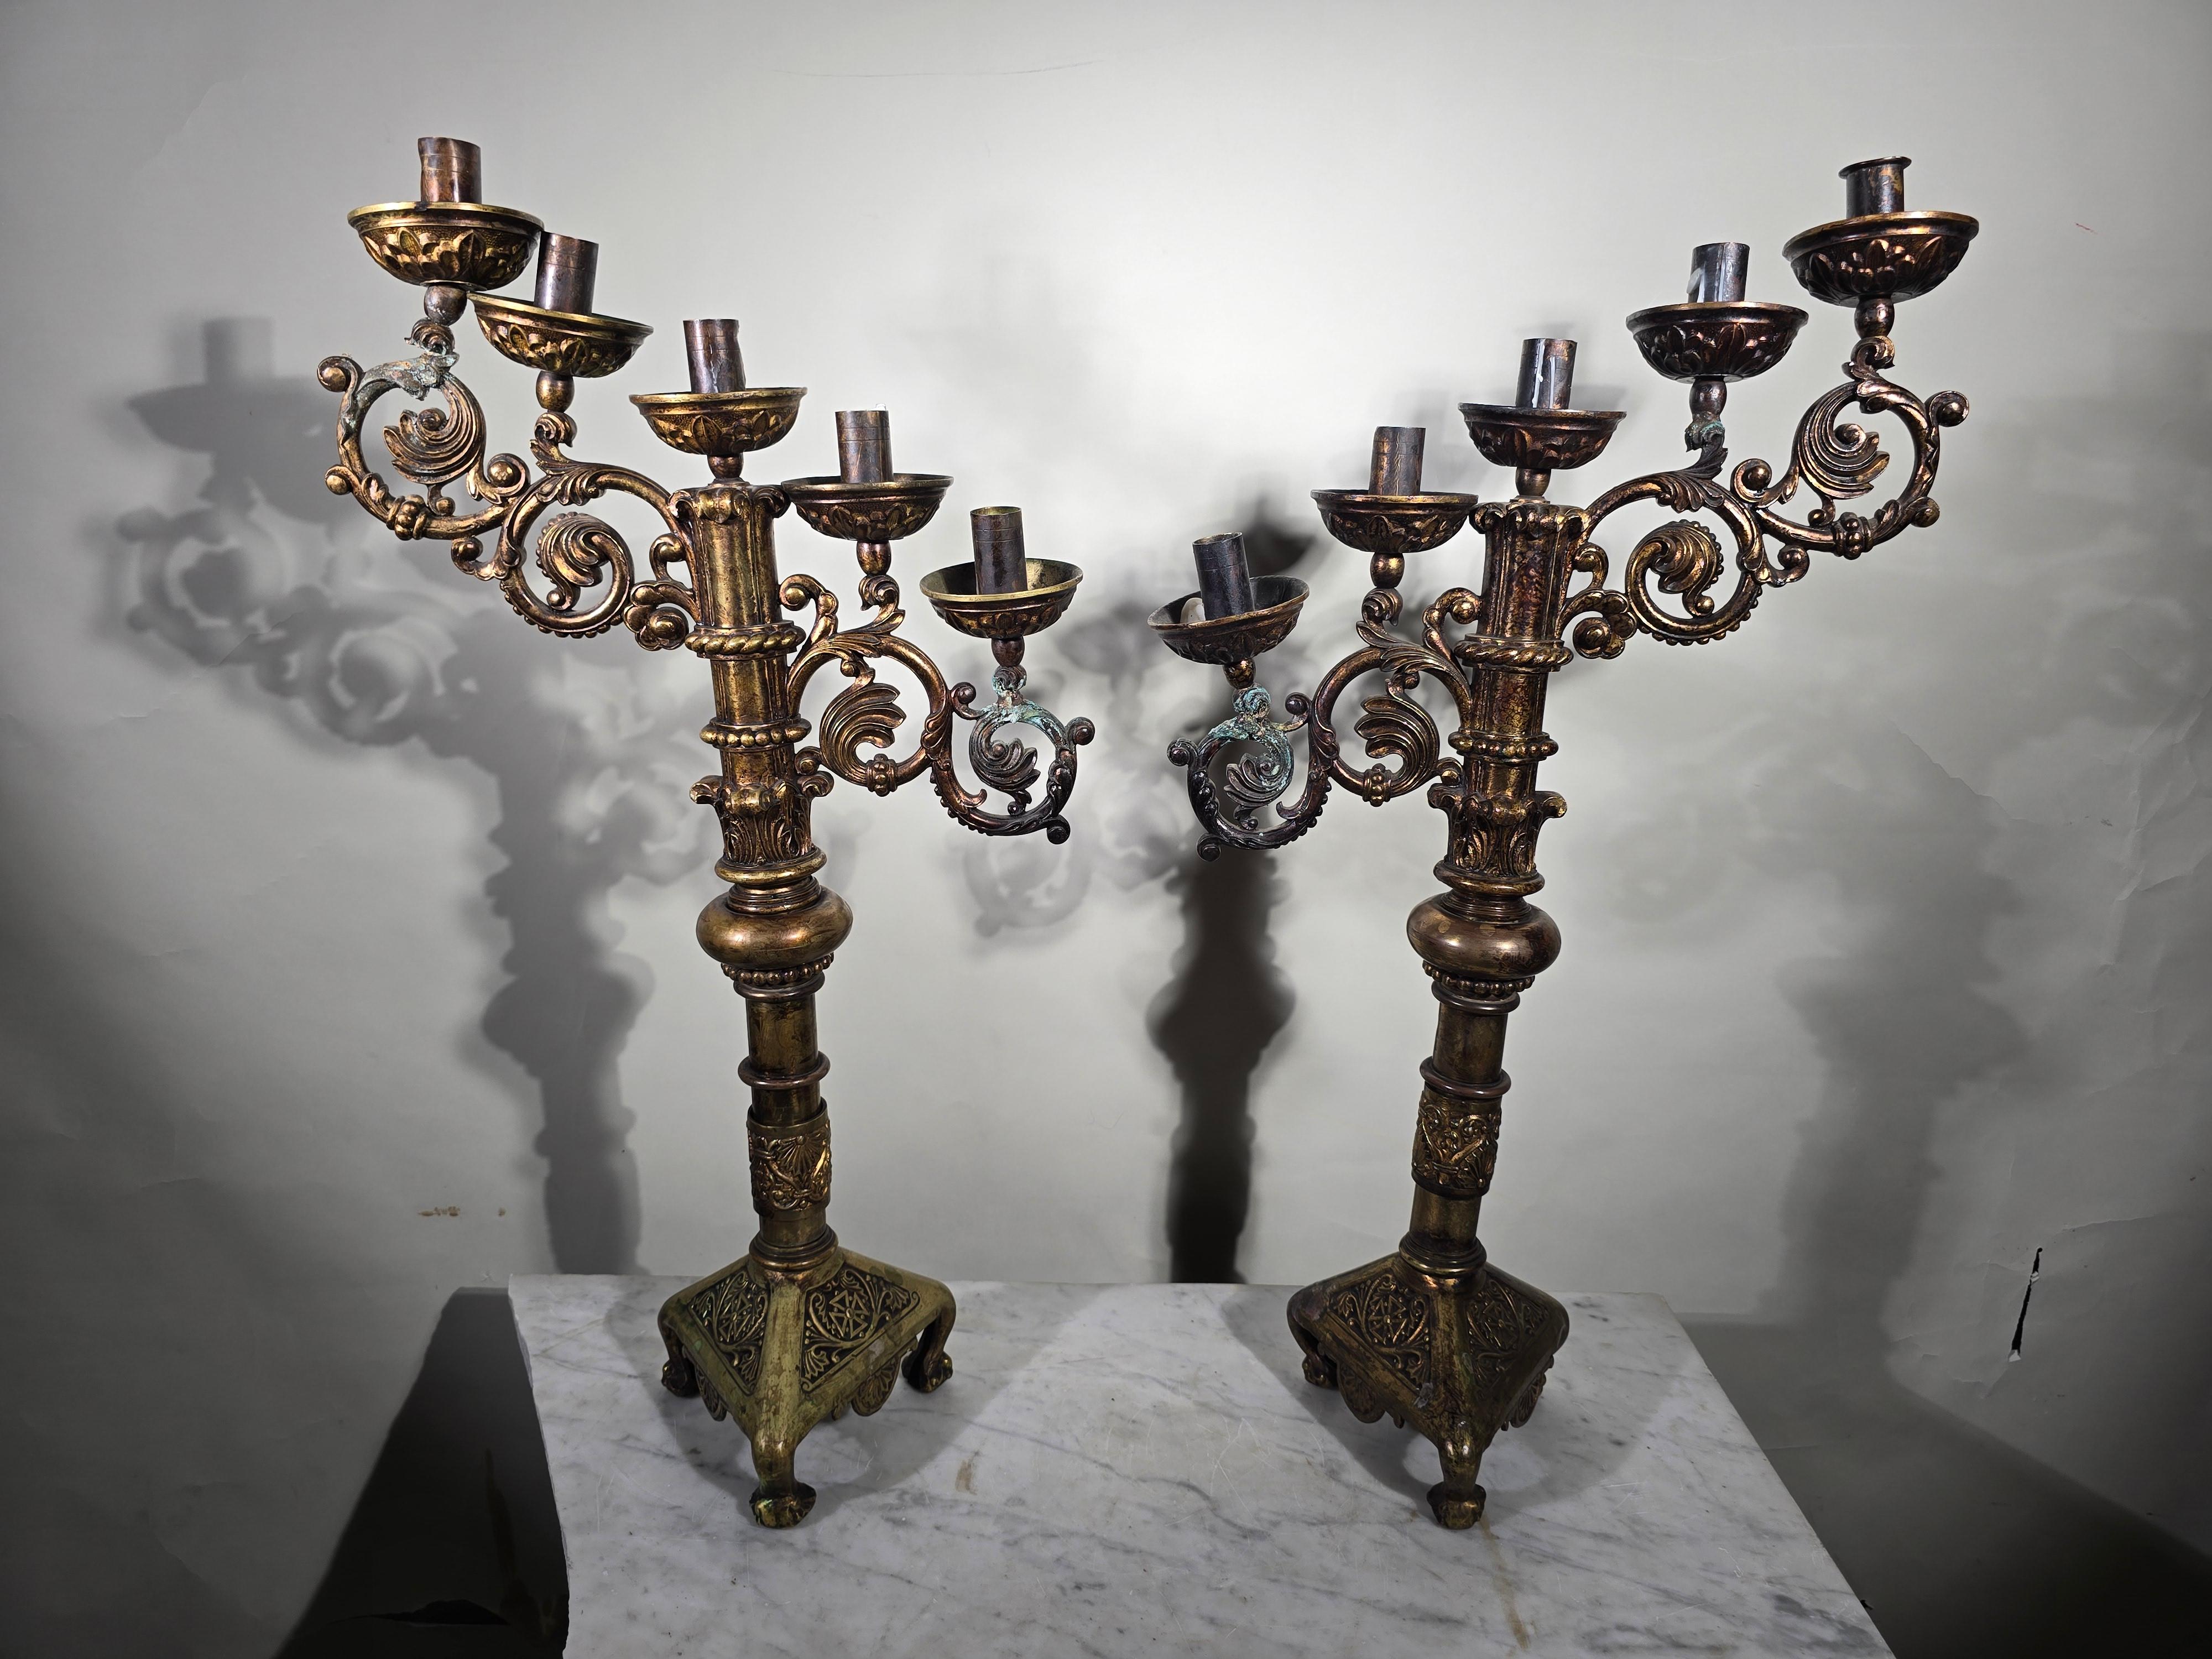 This imposing pair of candlesticks from the 18th century, in the Spanish Renaissance style, is a true work of art crafted in embossed bronze. They possess a significant visual presence and weight, attesting to their quality and sturdiness.

Each